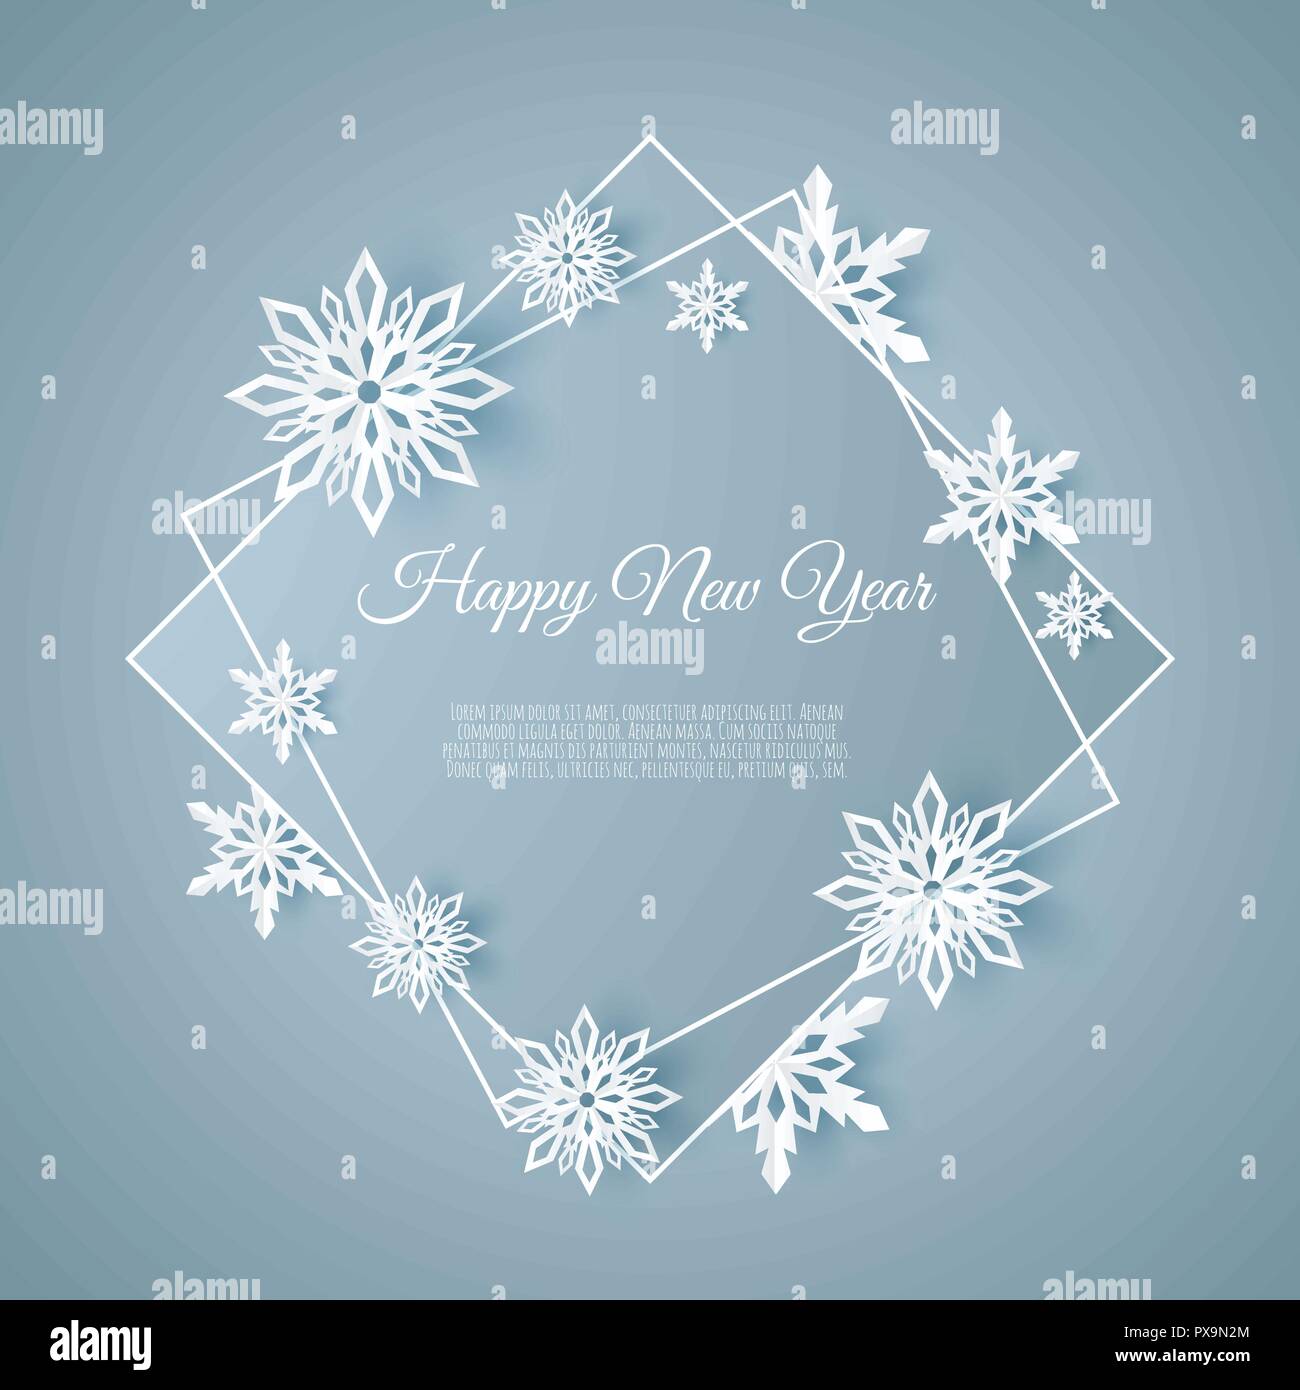 Christmas and New Years background with Frame Made of paper snowflakes. Stock Vector